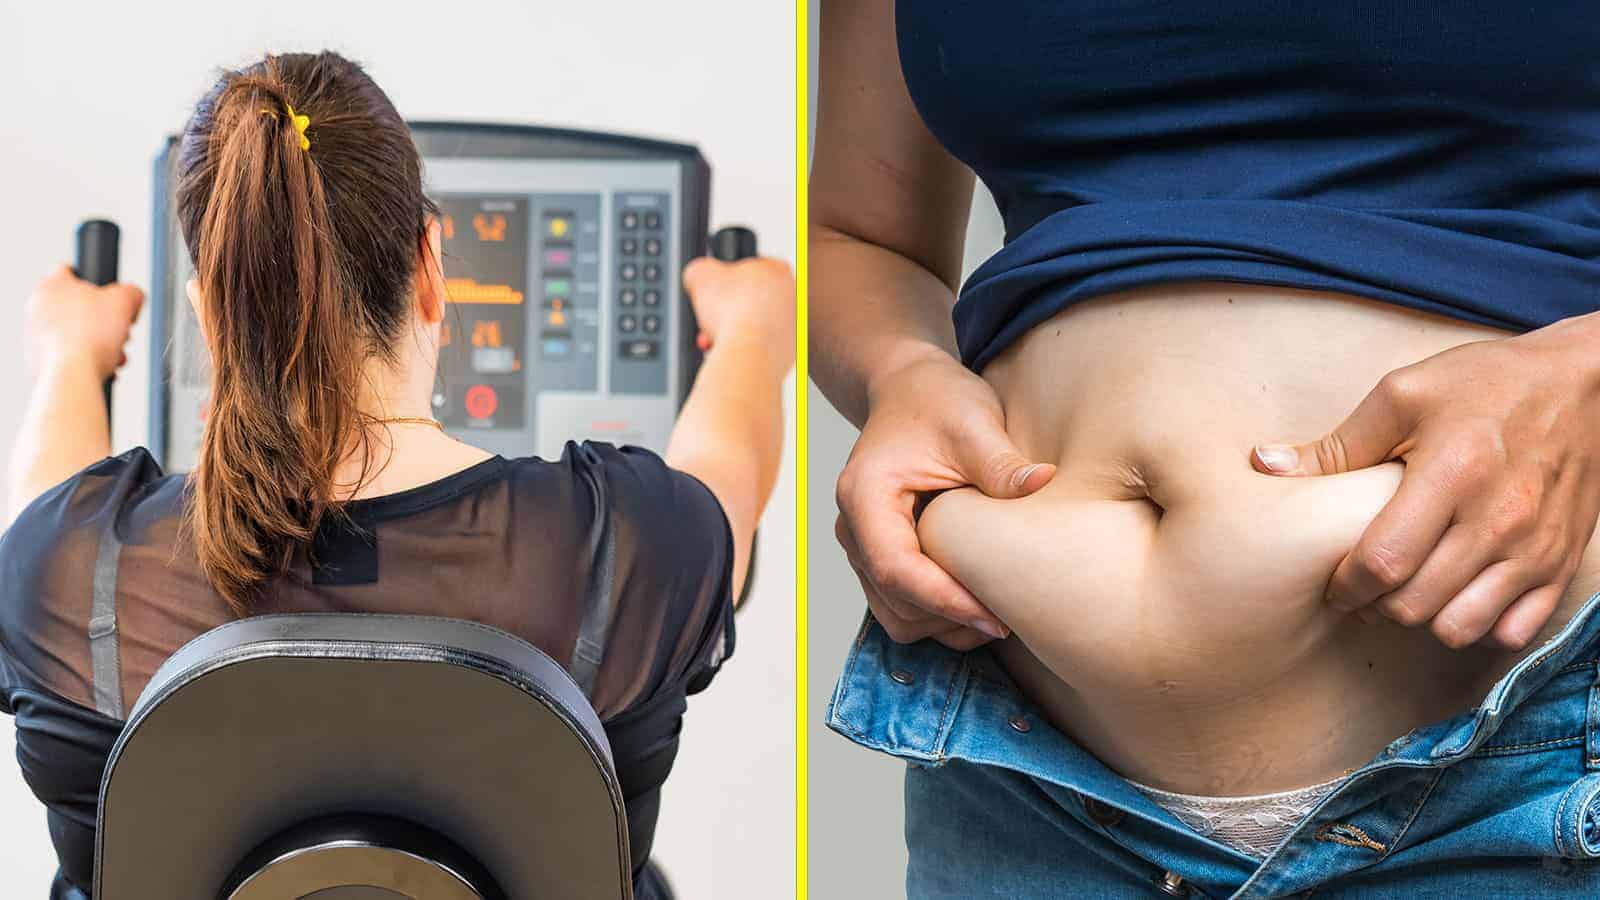 Researchers Explain Why Cardio Is Not The Best Way to Lose Belly Fat (And What To Do Instead)